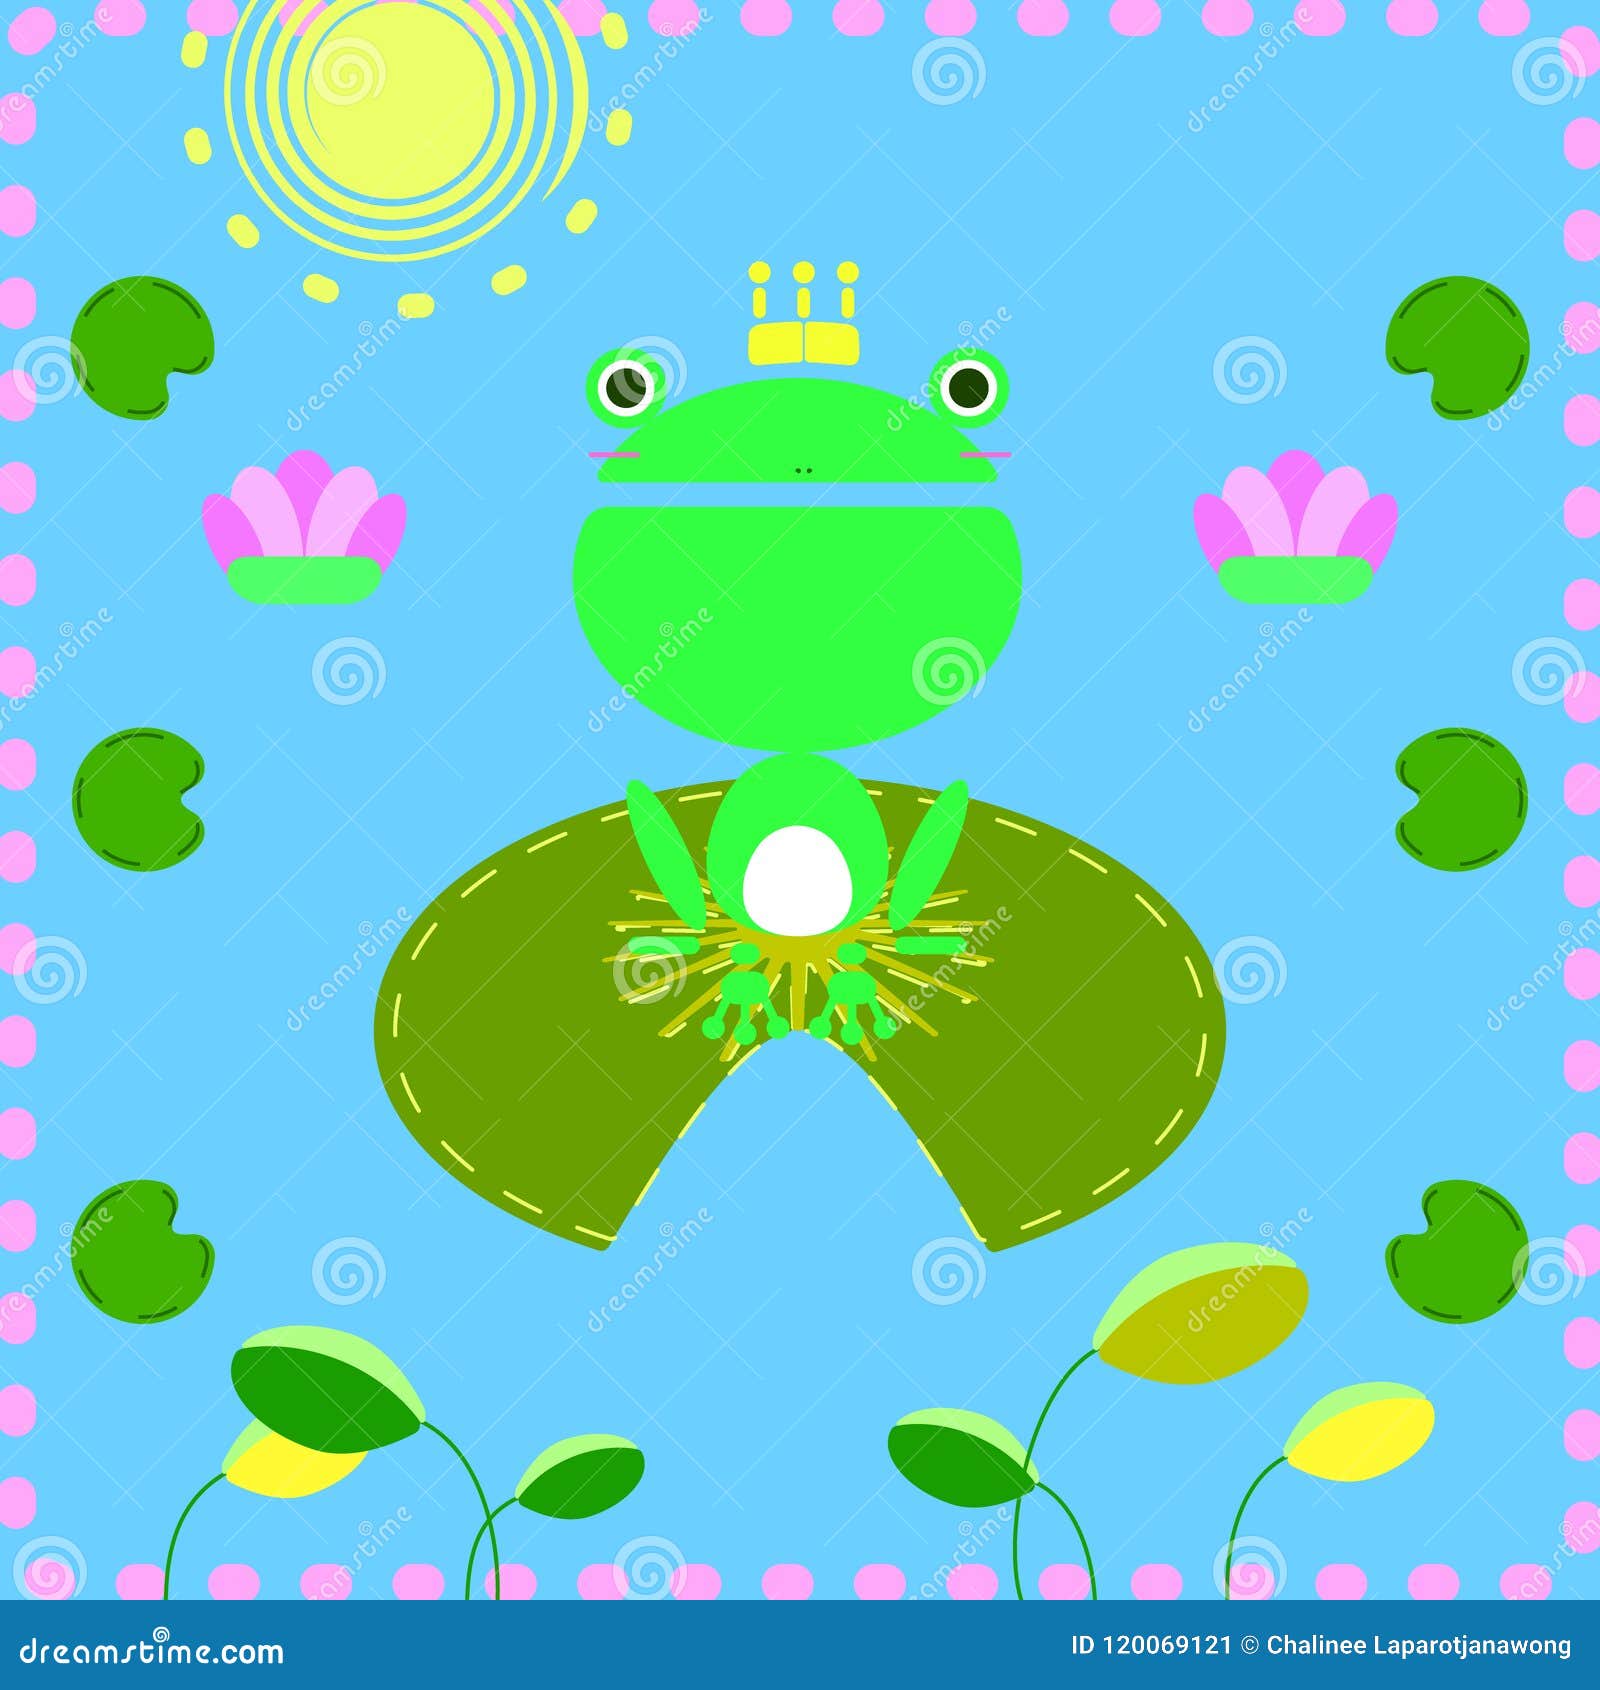 The frog with lotus leaf stock vector. Illustration of moon - 120069121